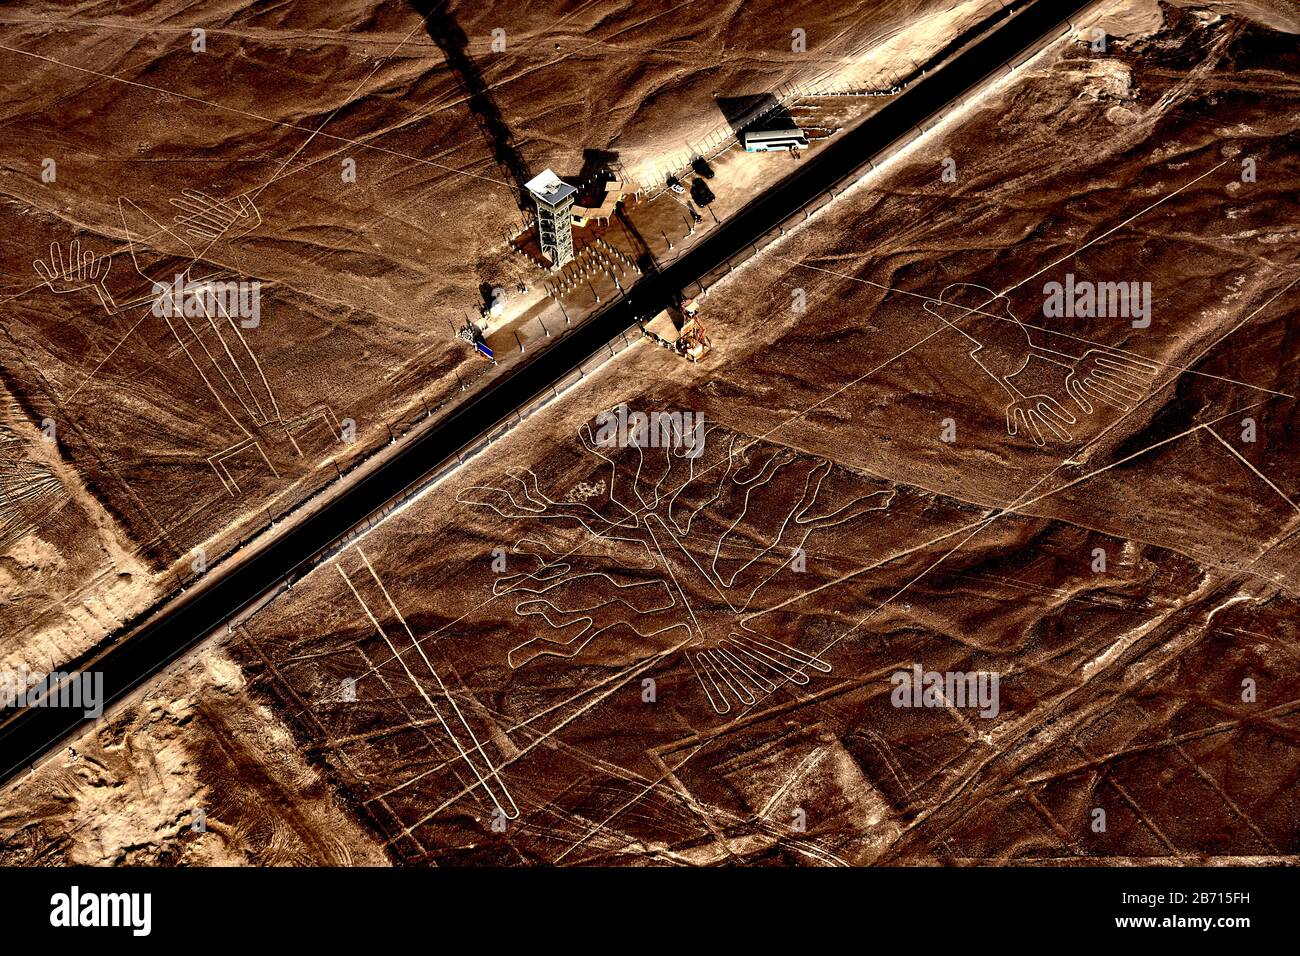 Nazca lines above tower and road from a small aeroplane. Stock Photo